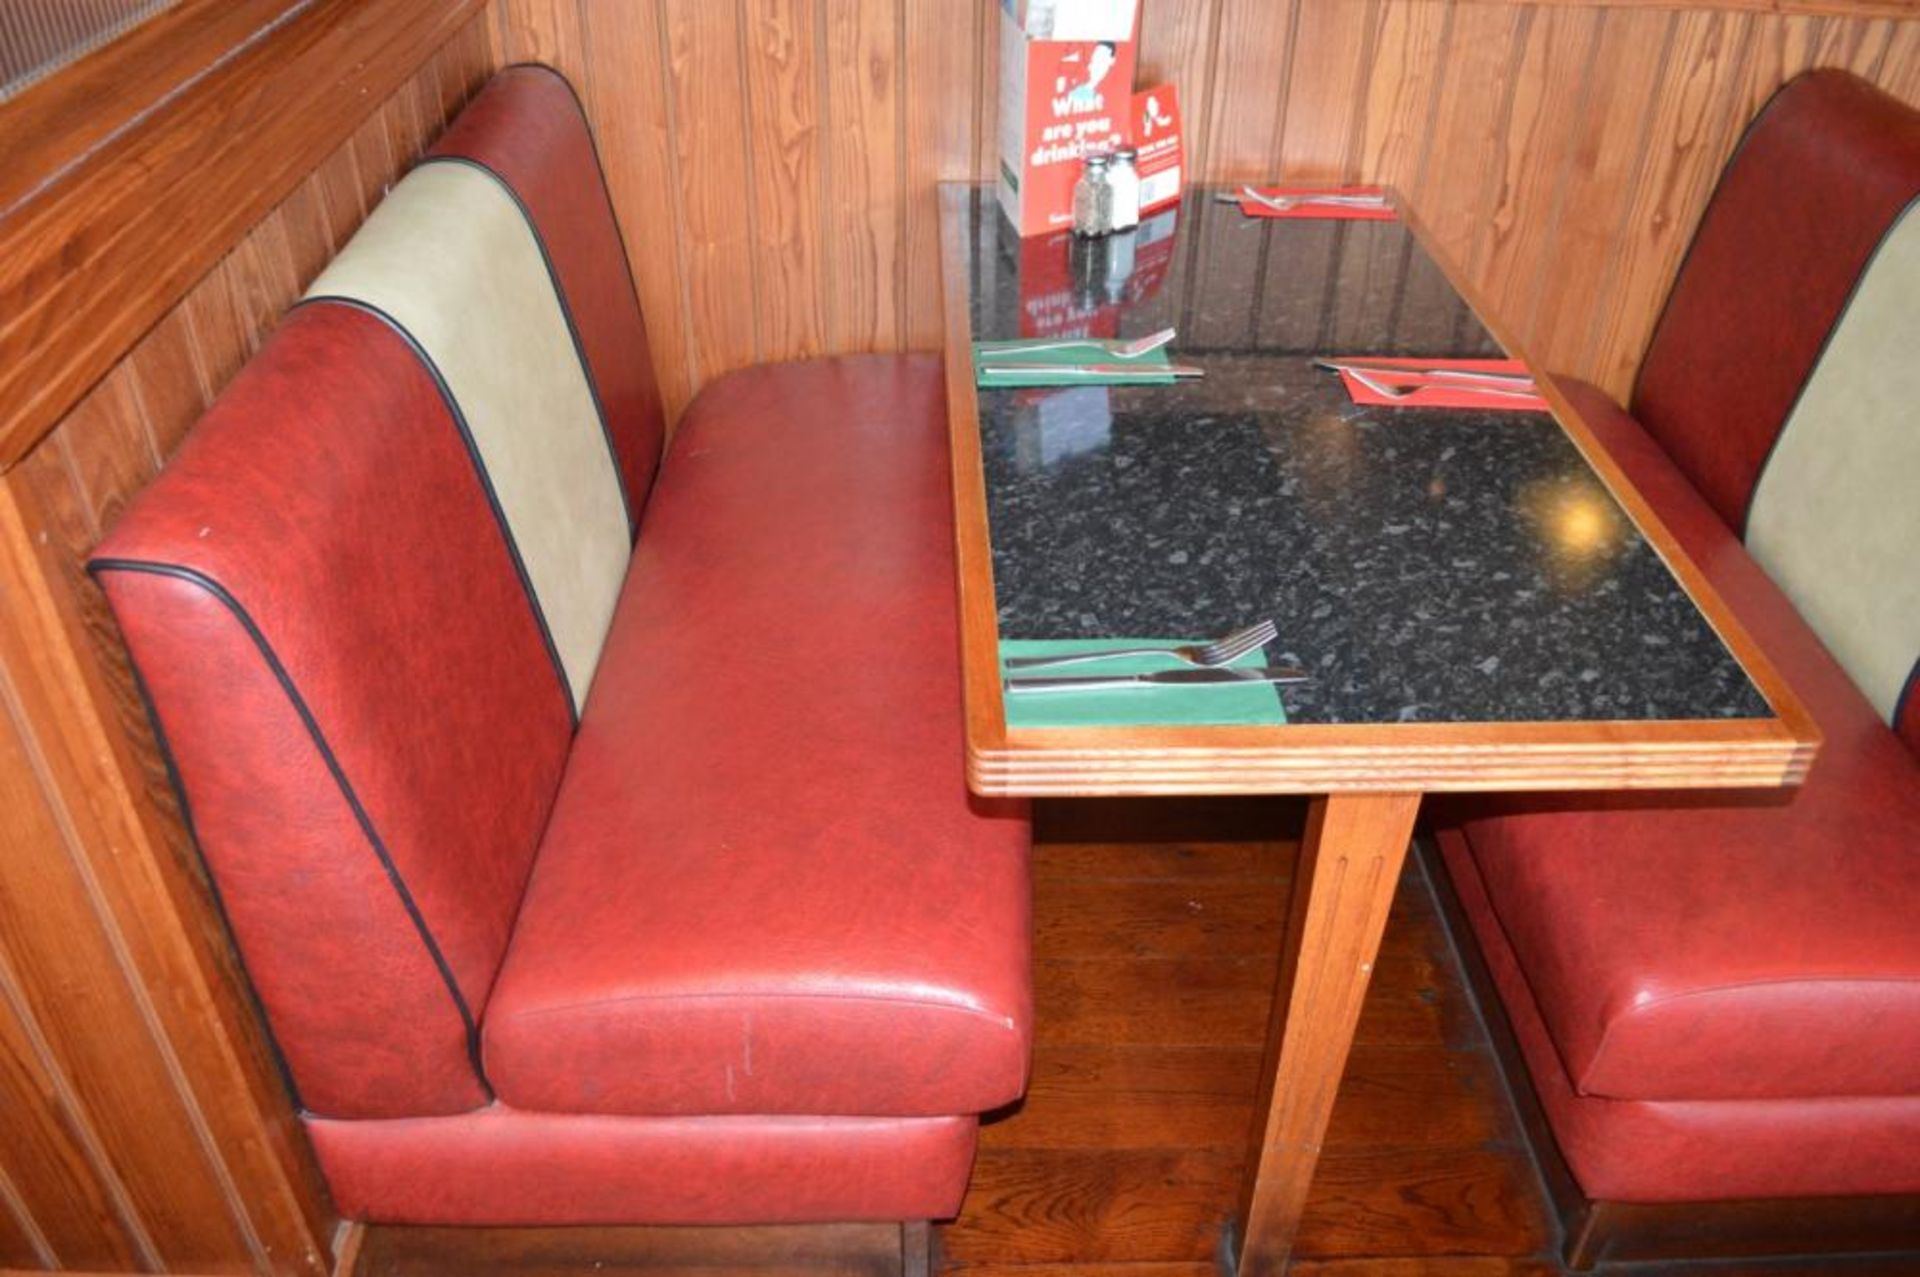 1 x Selection of Cosy Bespoke Seating Booths in a 1950's Retro American Diner Design With Dining Tab - Image 24 of 30